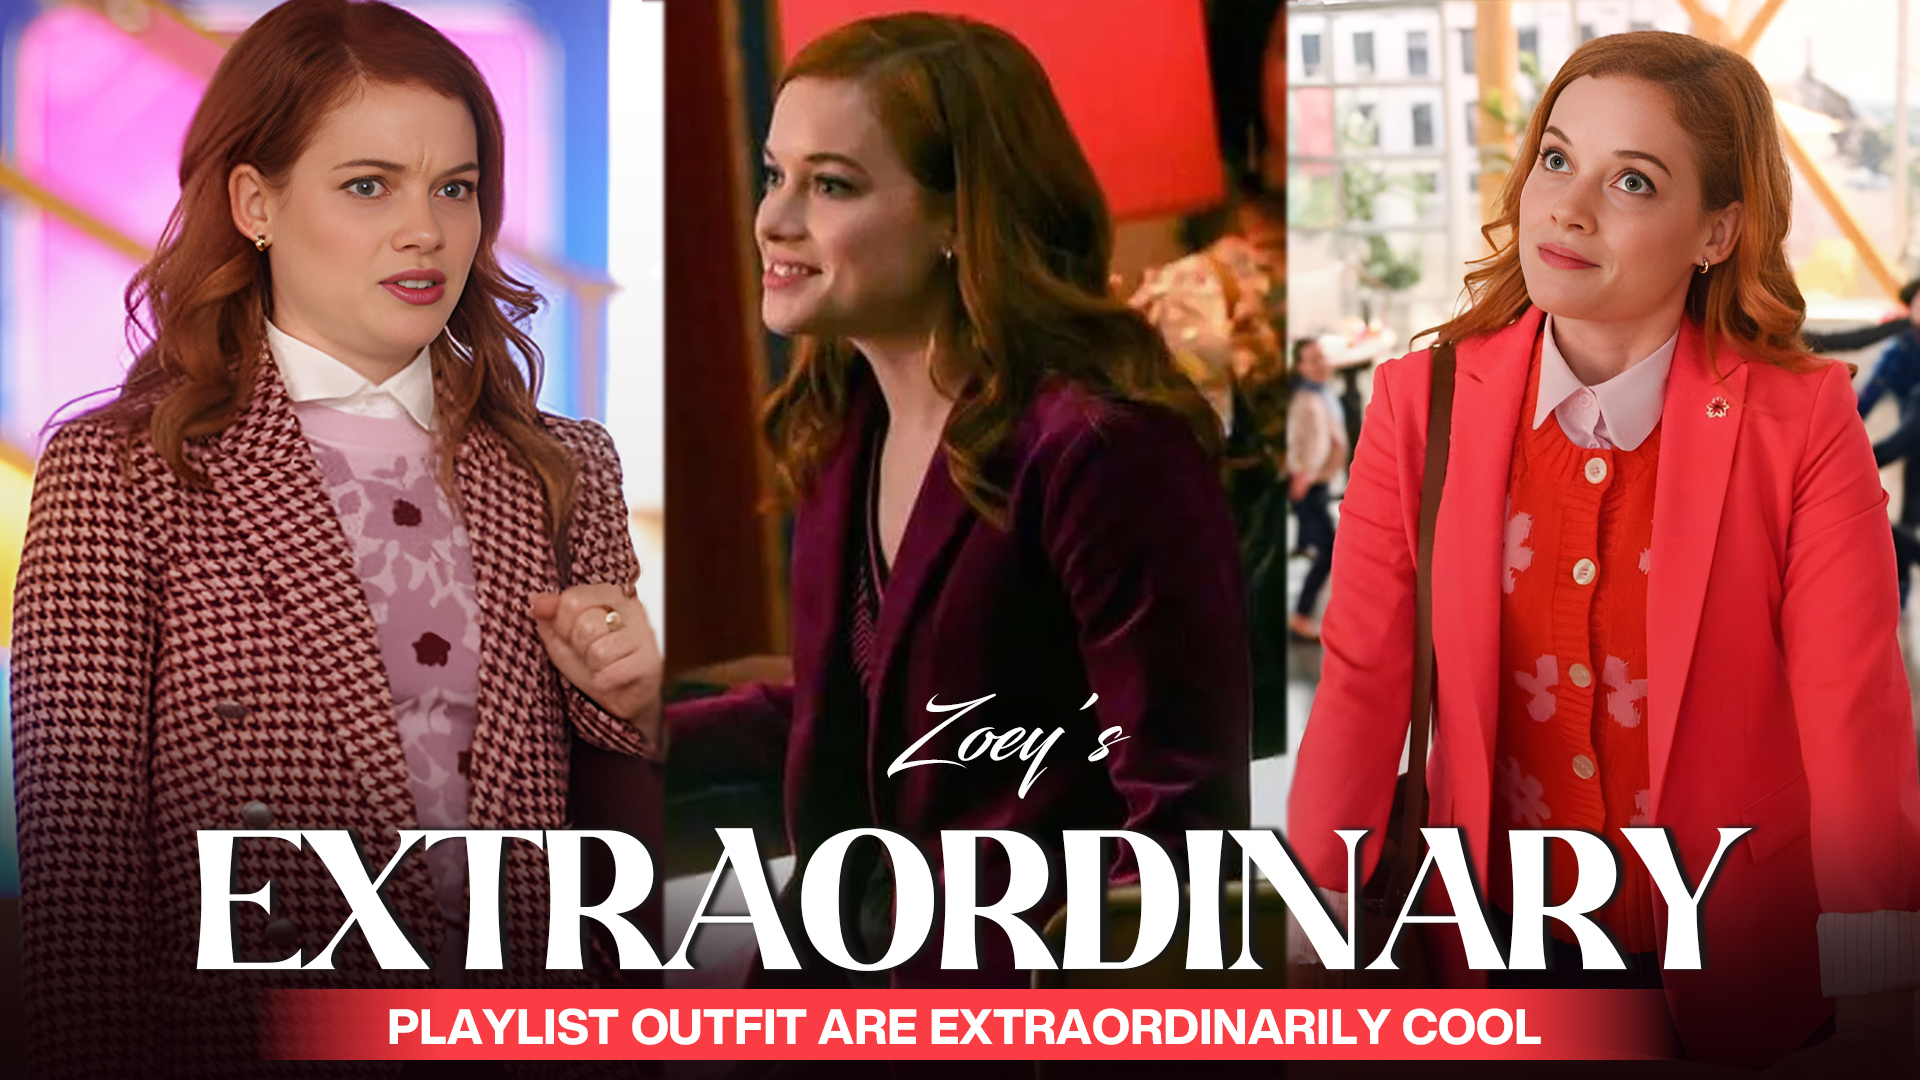 Zoeys Extraordinary Playlist Outfit Are Extraordinarily Cool